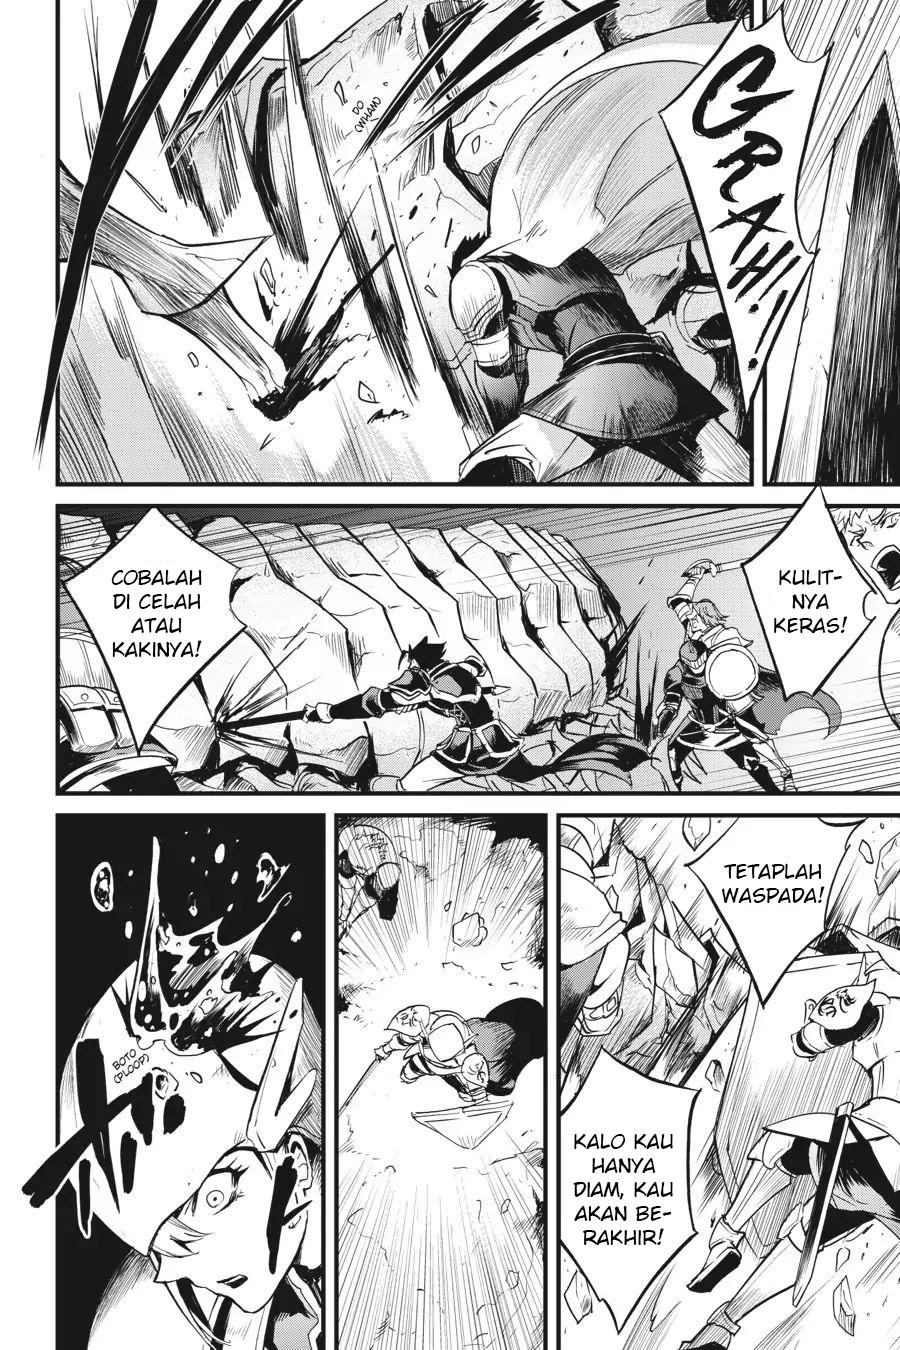 Goblin Slayer: Side Story Year One Chapter 17.5